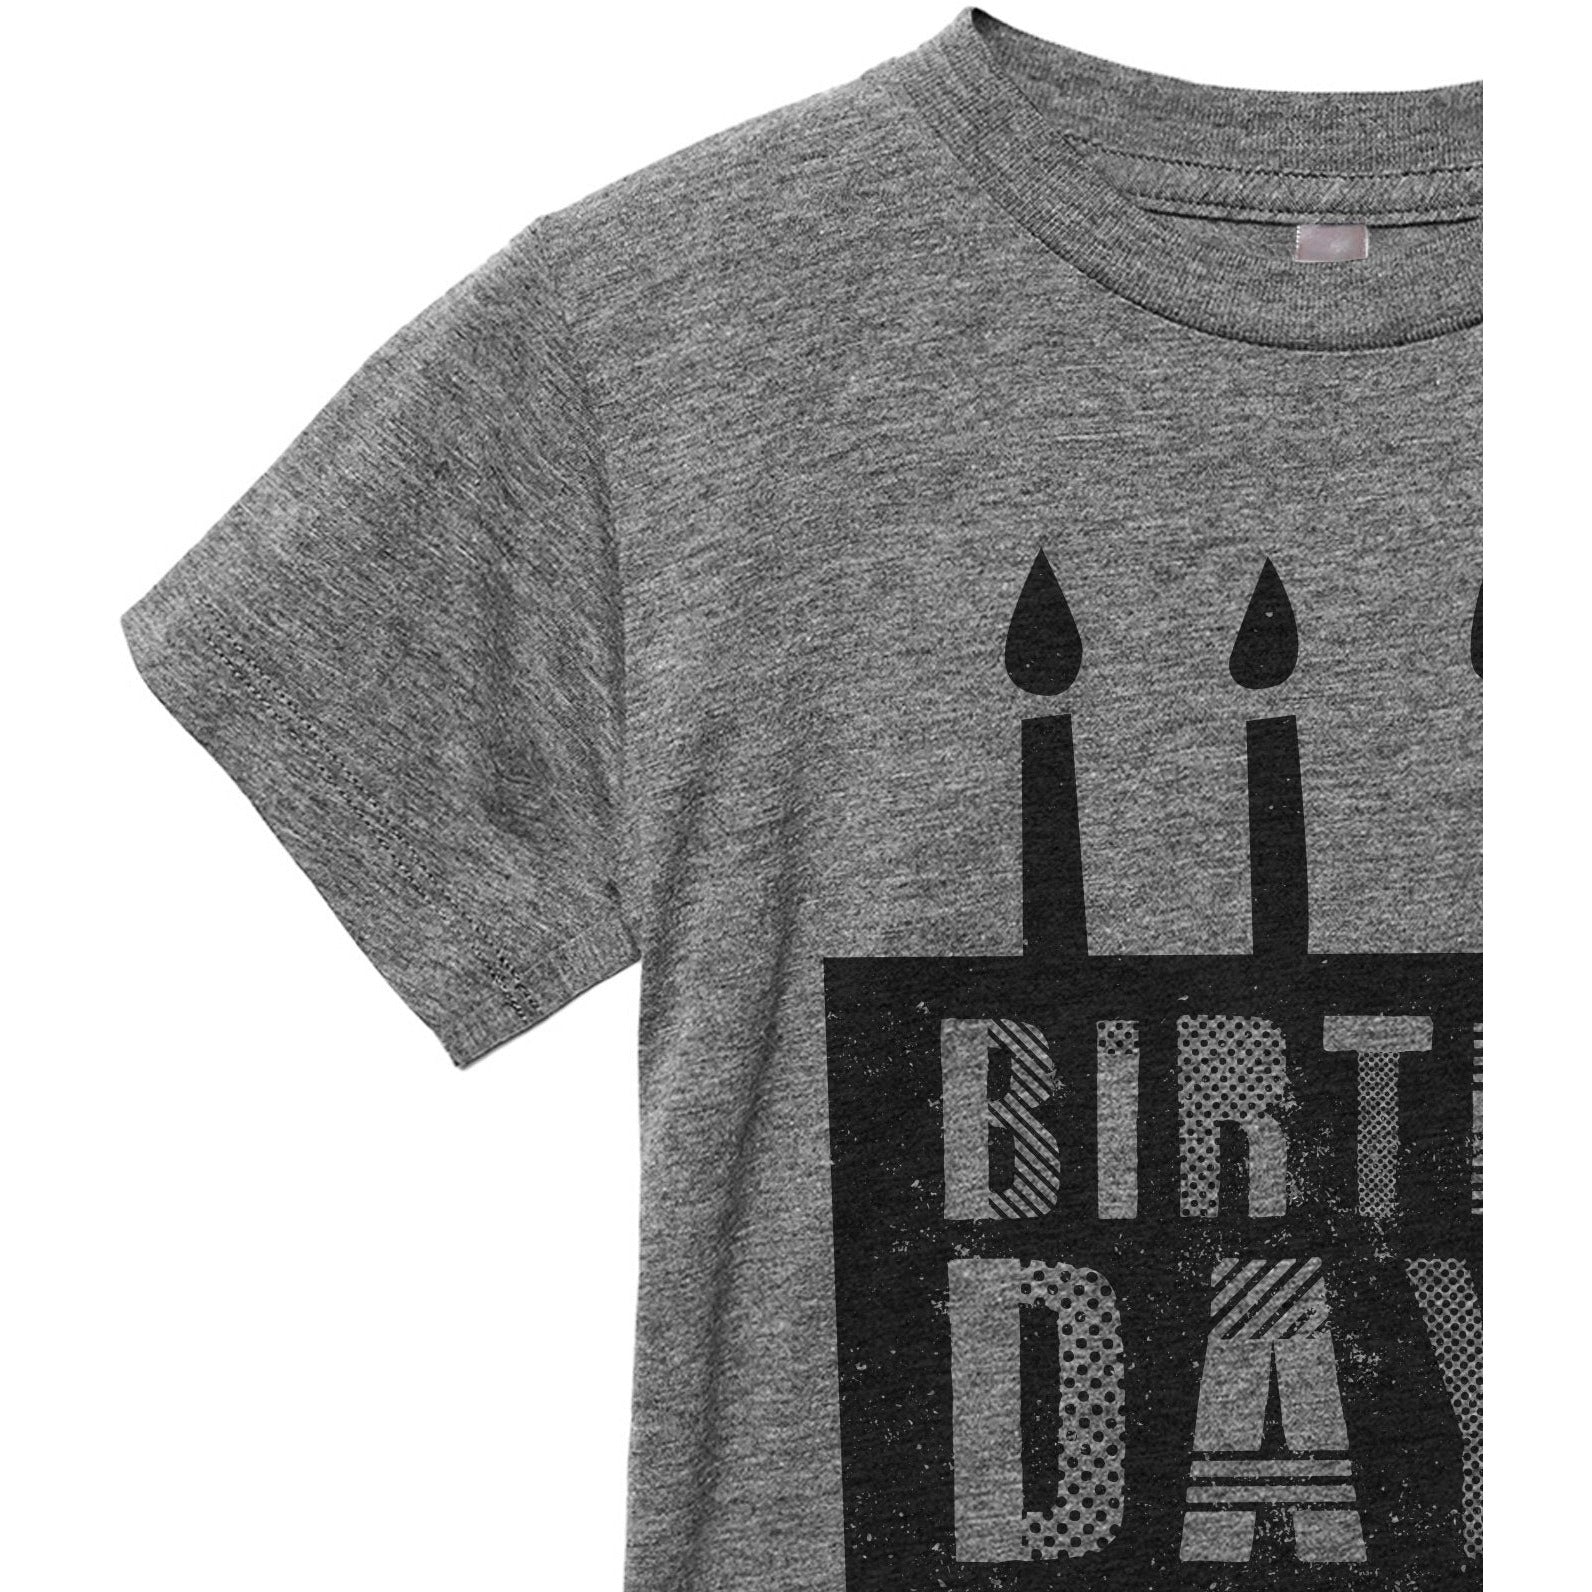 Birthday Girl Toddler's Go-To Crewneck Tee Charcoal Zoom Details A